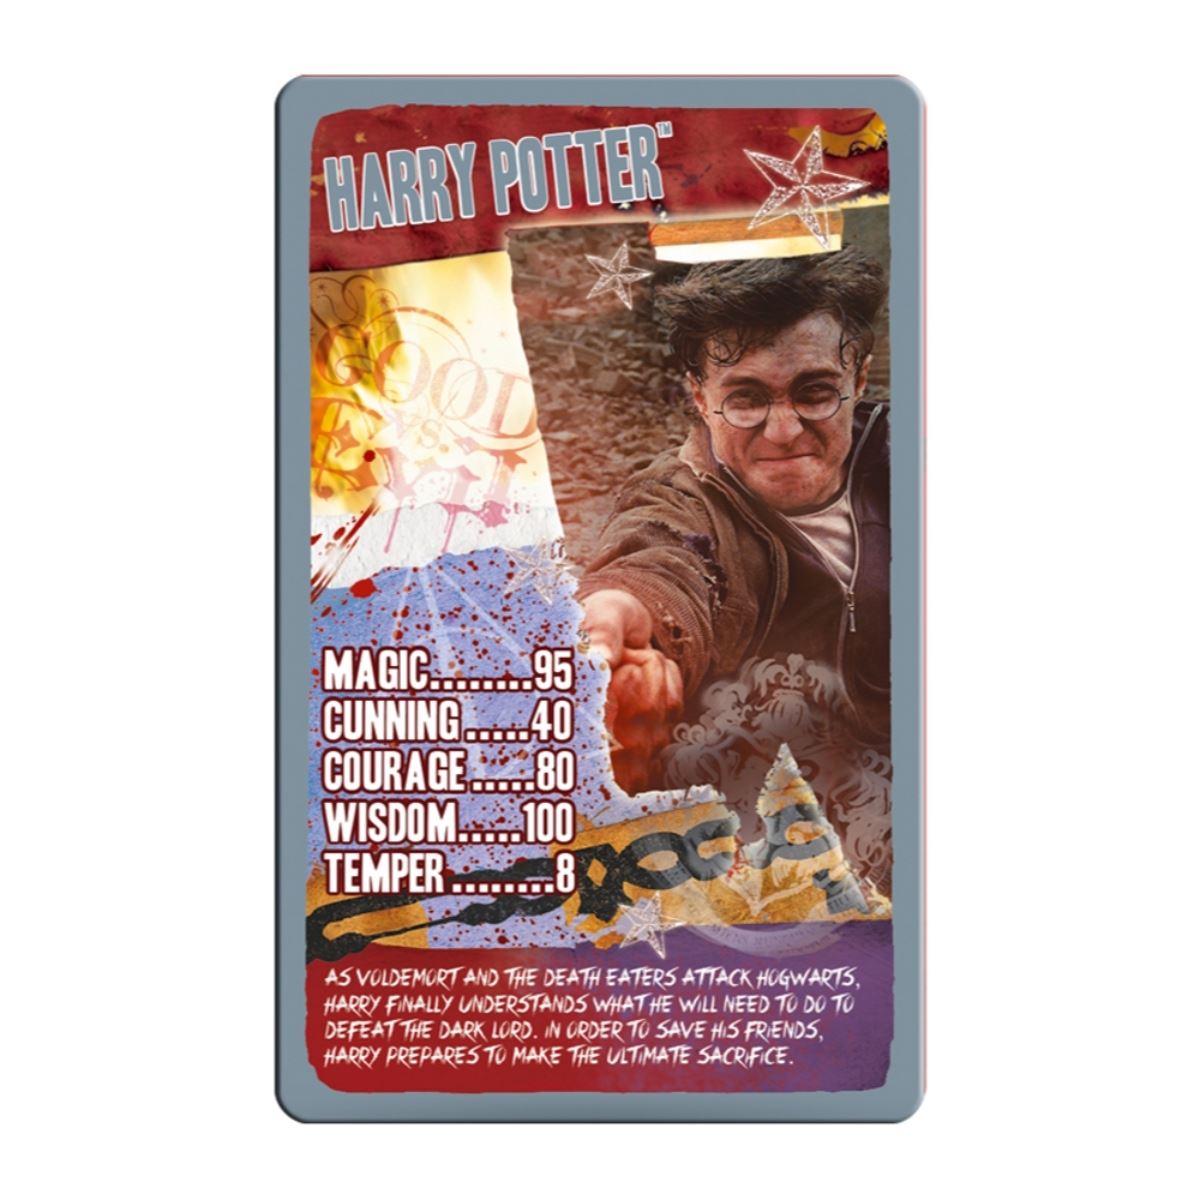 Harry Potter & The Deathly Hallows Pt 2 Top Trumps Card Game